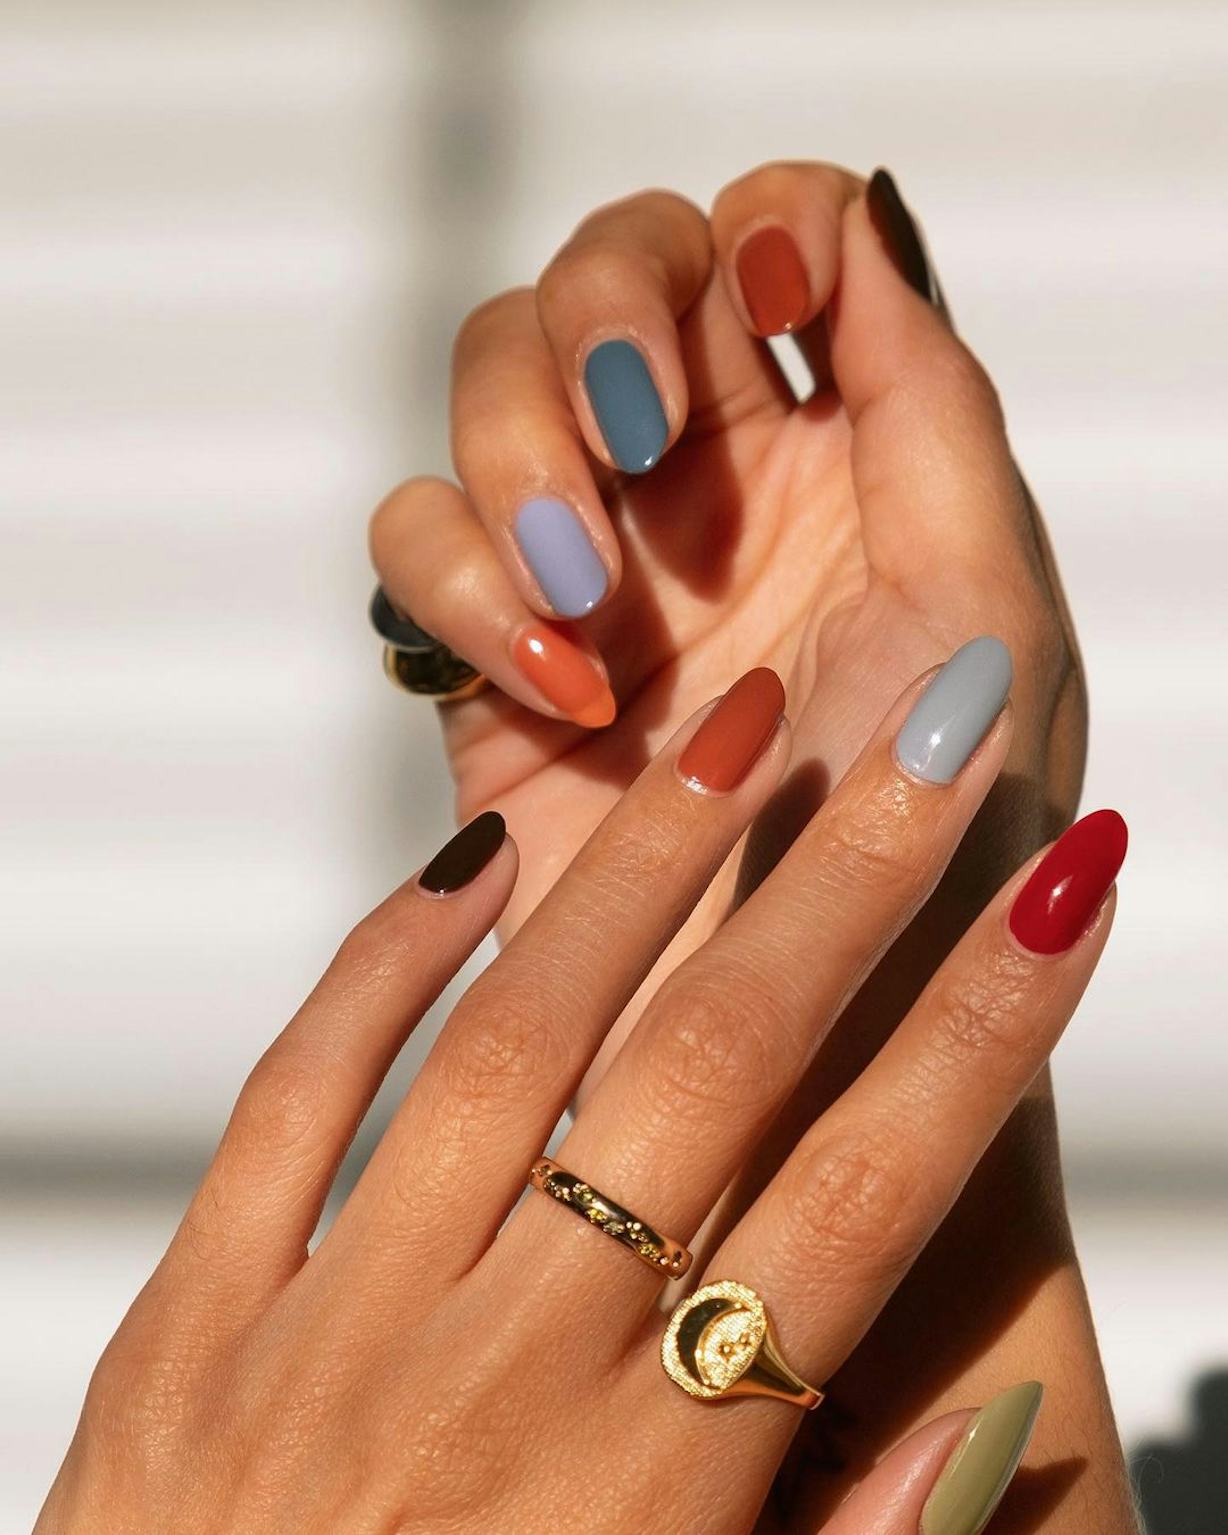 What is the nail trend for fall?